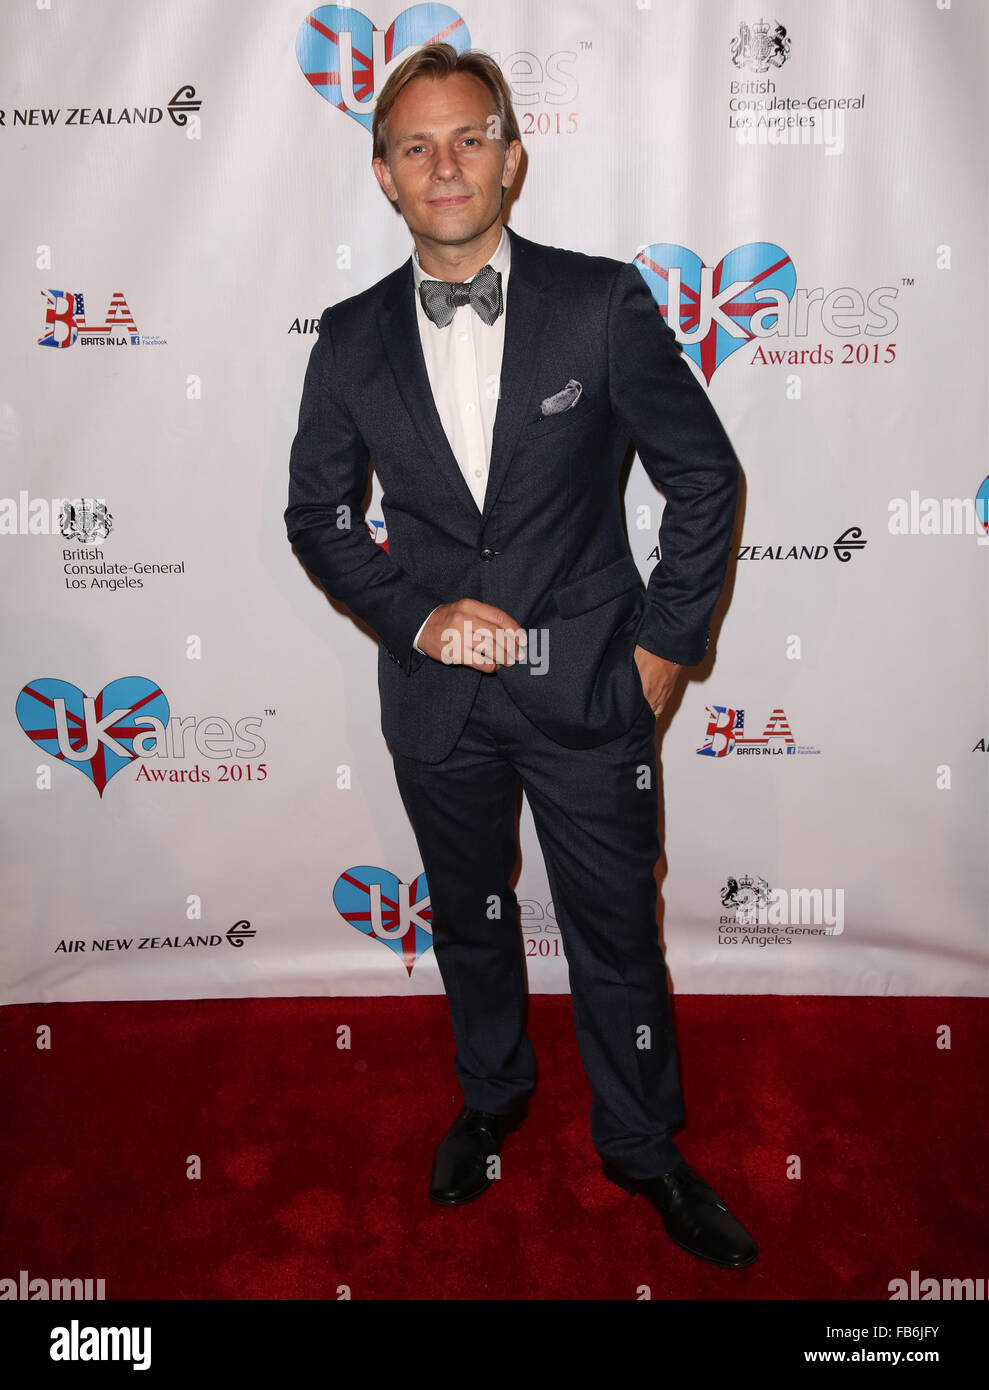 Celebrities attend UKares Awards presented by UKares Foundation and Brits in LA at home of the British Consulate-General Los Angeles.  Featuring: Craig Young Where: Los Angeles, California, United States When: 10 Dec 2015 Stock Photo